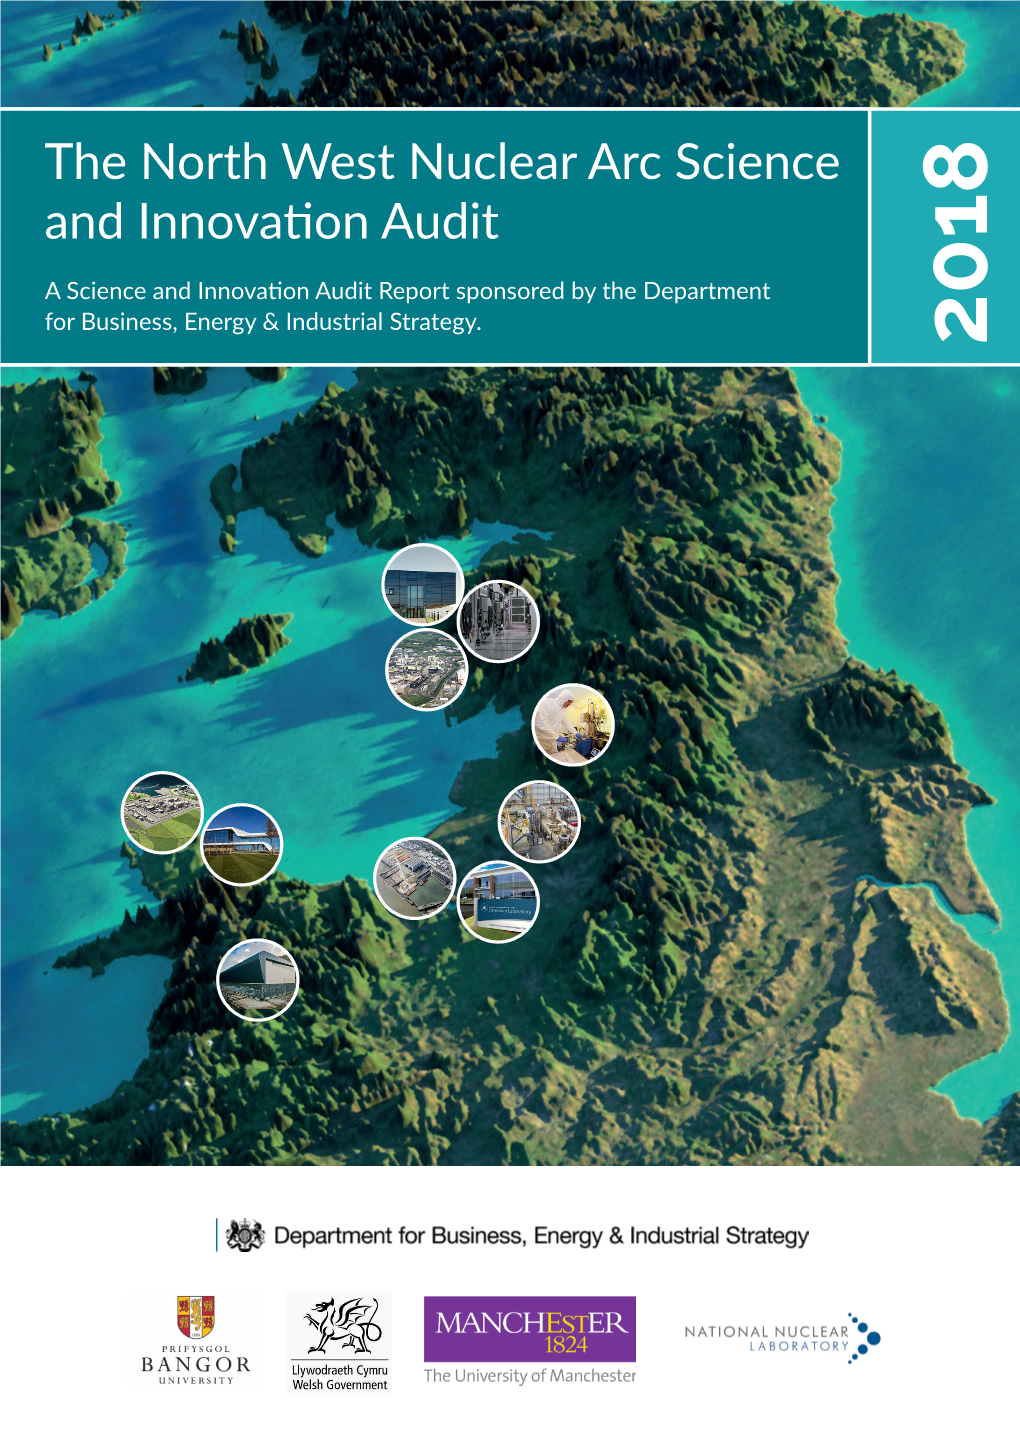 The North West Nuclear Arc Science and Innovation Audit